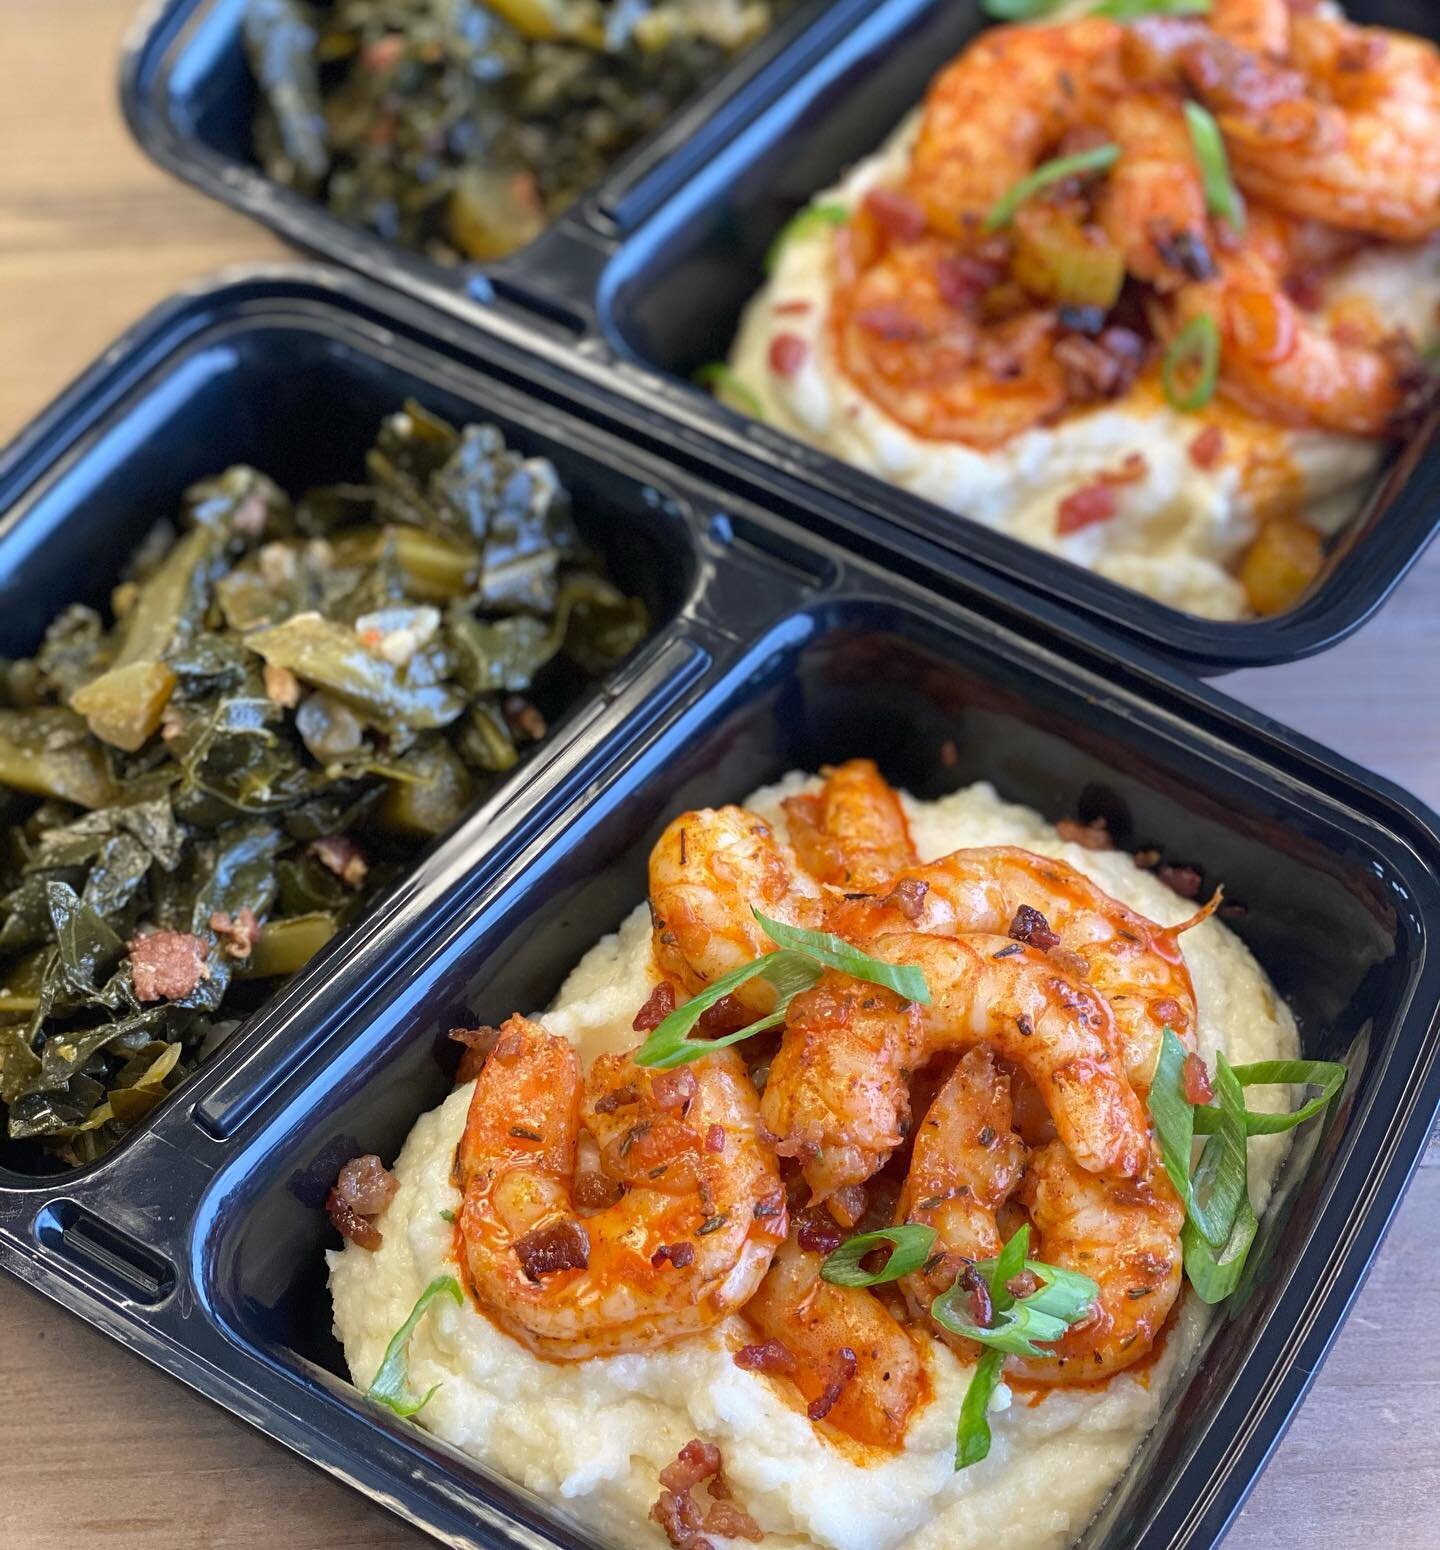 Wow y&rsquo;all. 🔥 THANK YOU for such an epic menu launch 🚀 we can&rsquo;t wait for everyone to try their new meals! We hope you taste the love in every dish.

&hearts;️

Featured pic is our new item, Shrimp n&rsquo; Grits. It&rsquo;s creamy, chees